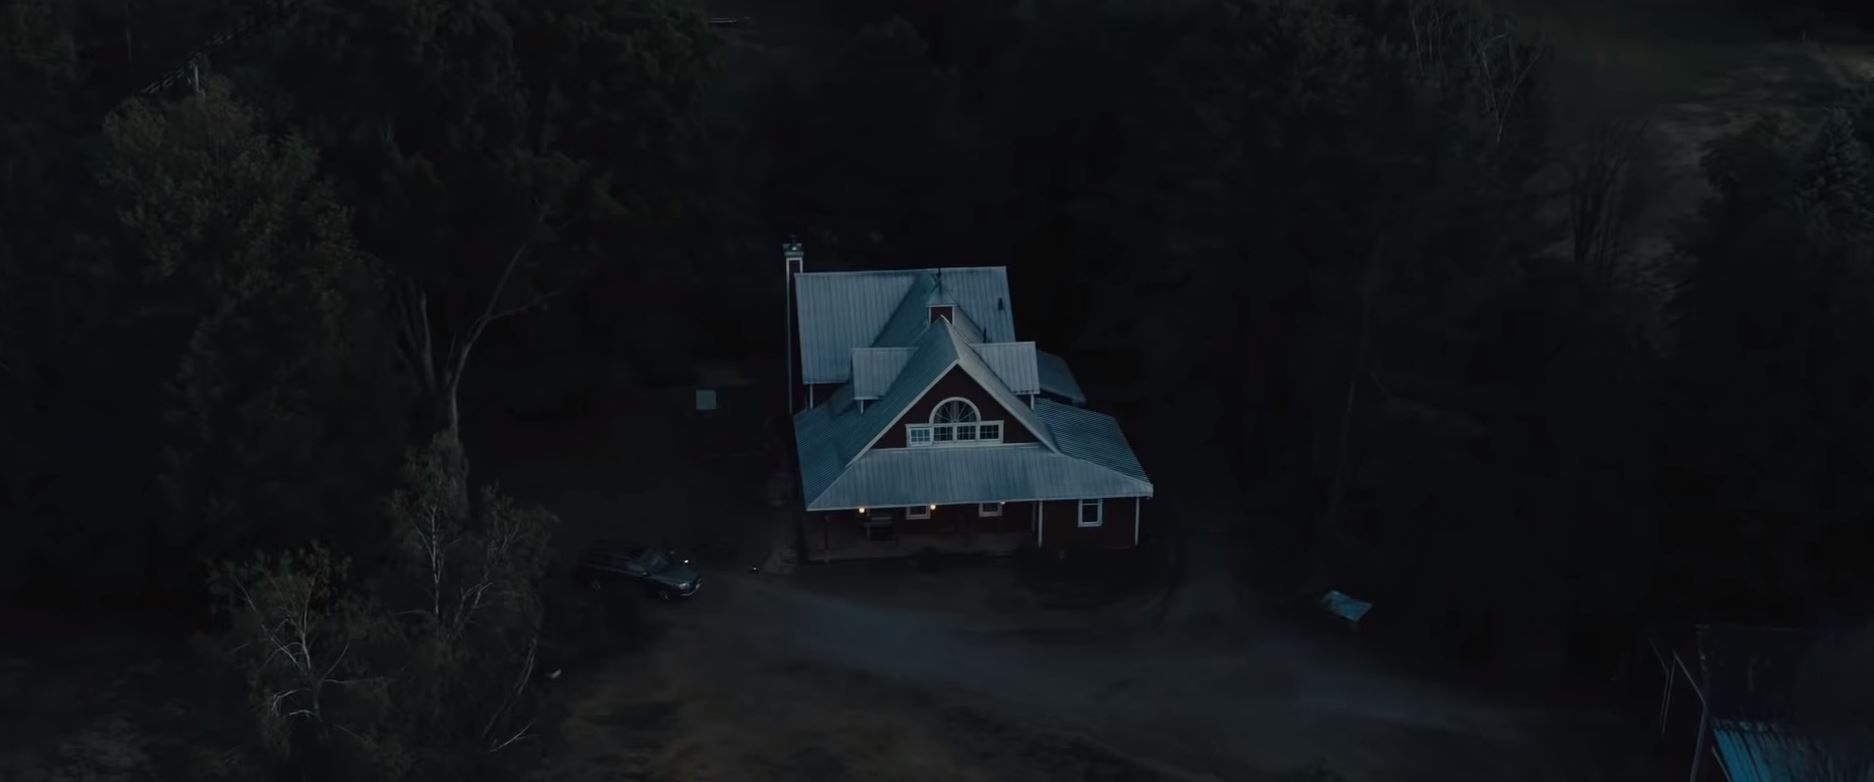 A Trailer For The 'Pet Sematary' Remake Is Here And It Will Definitely Creep You Out